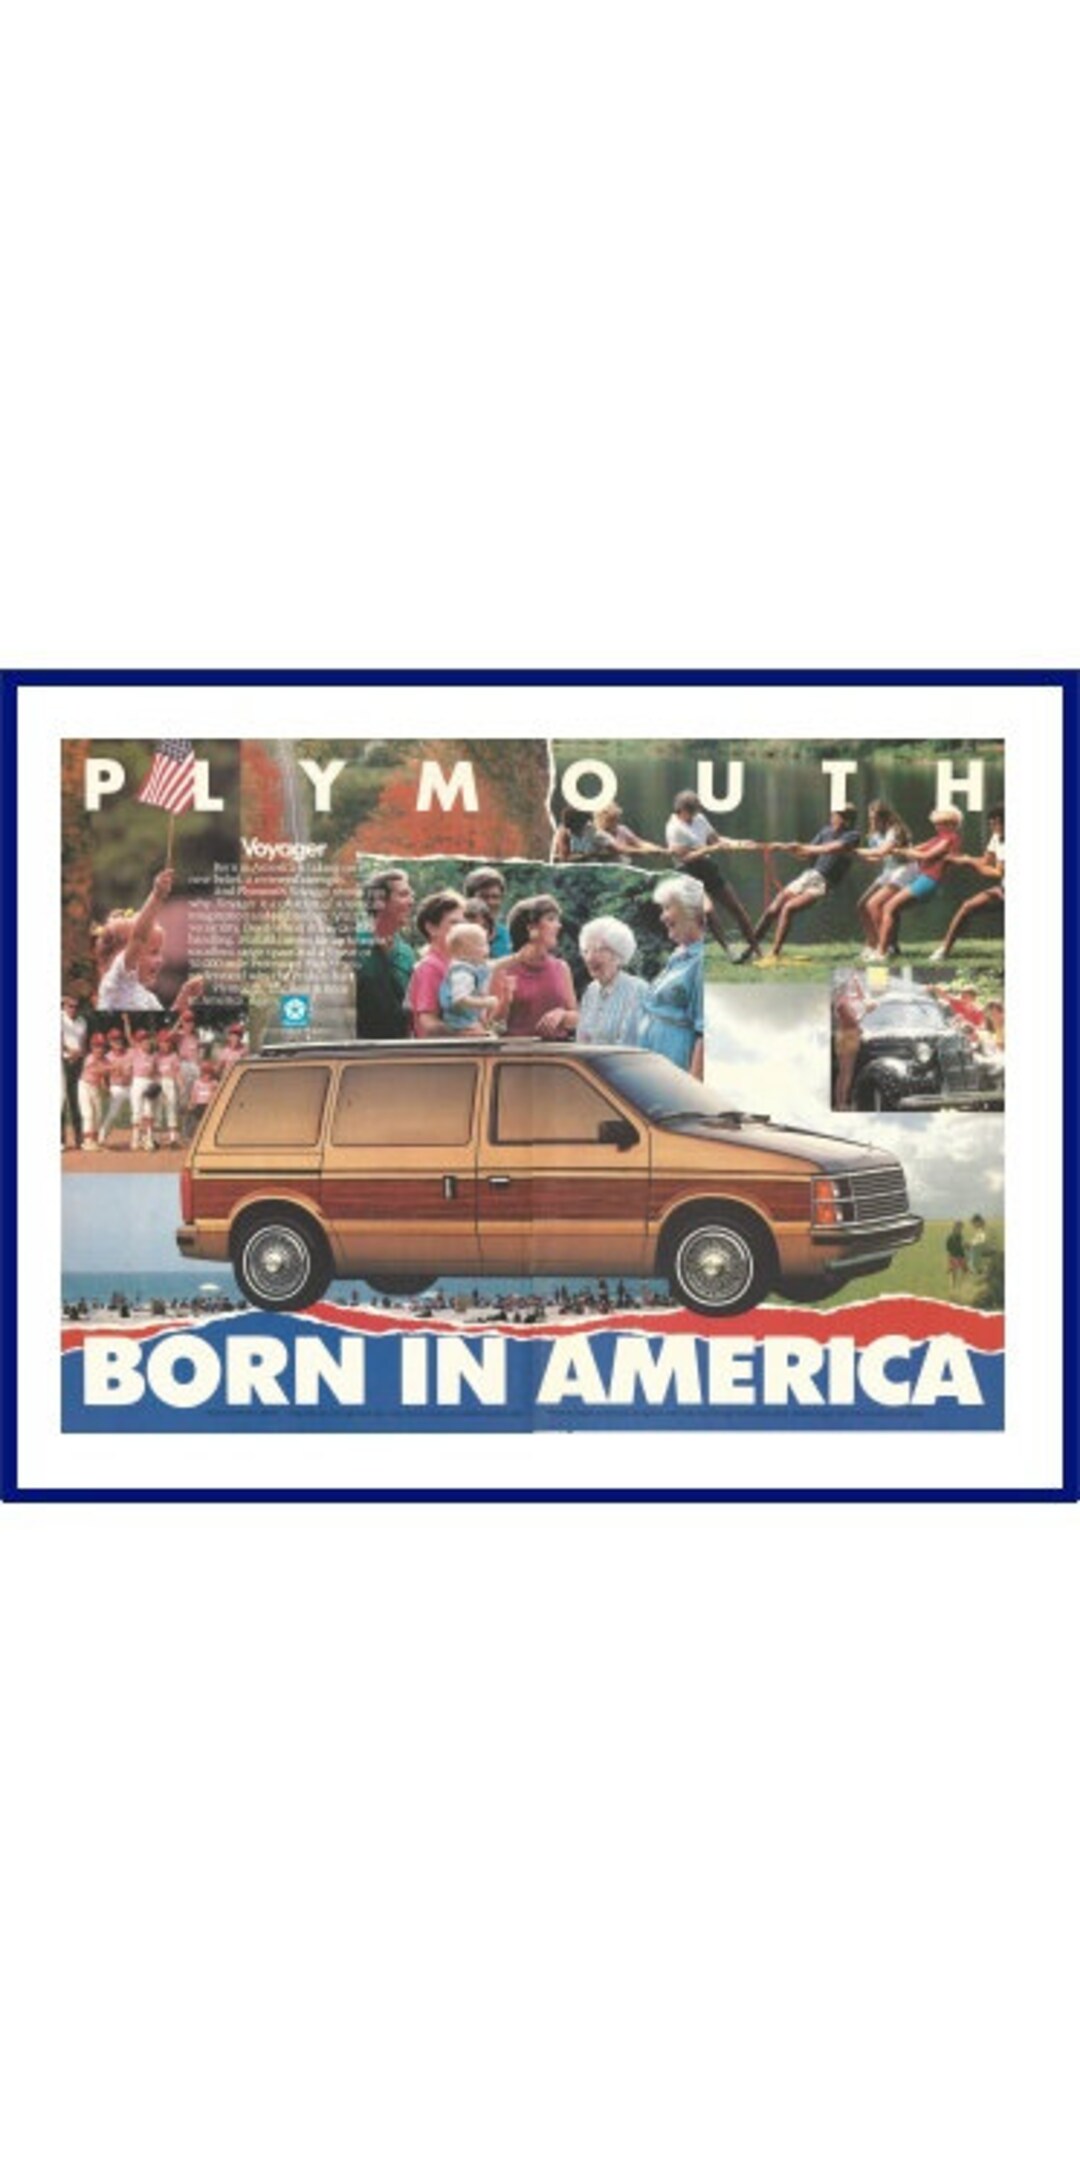 Plymouth Voyager - Wikipedia